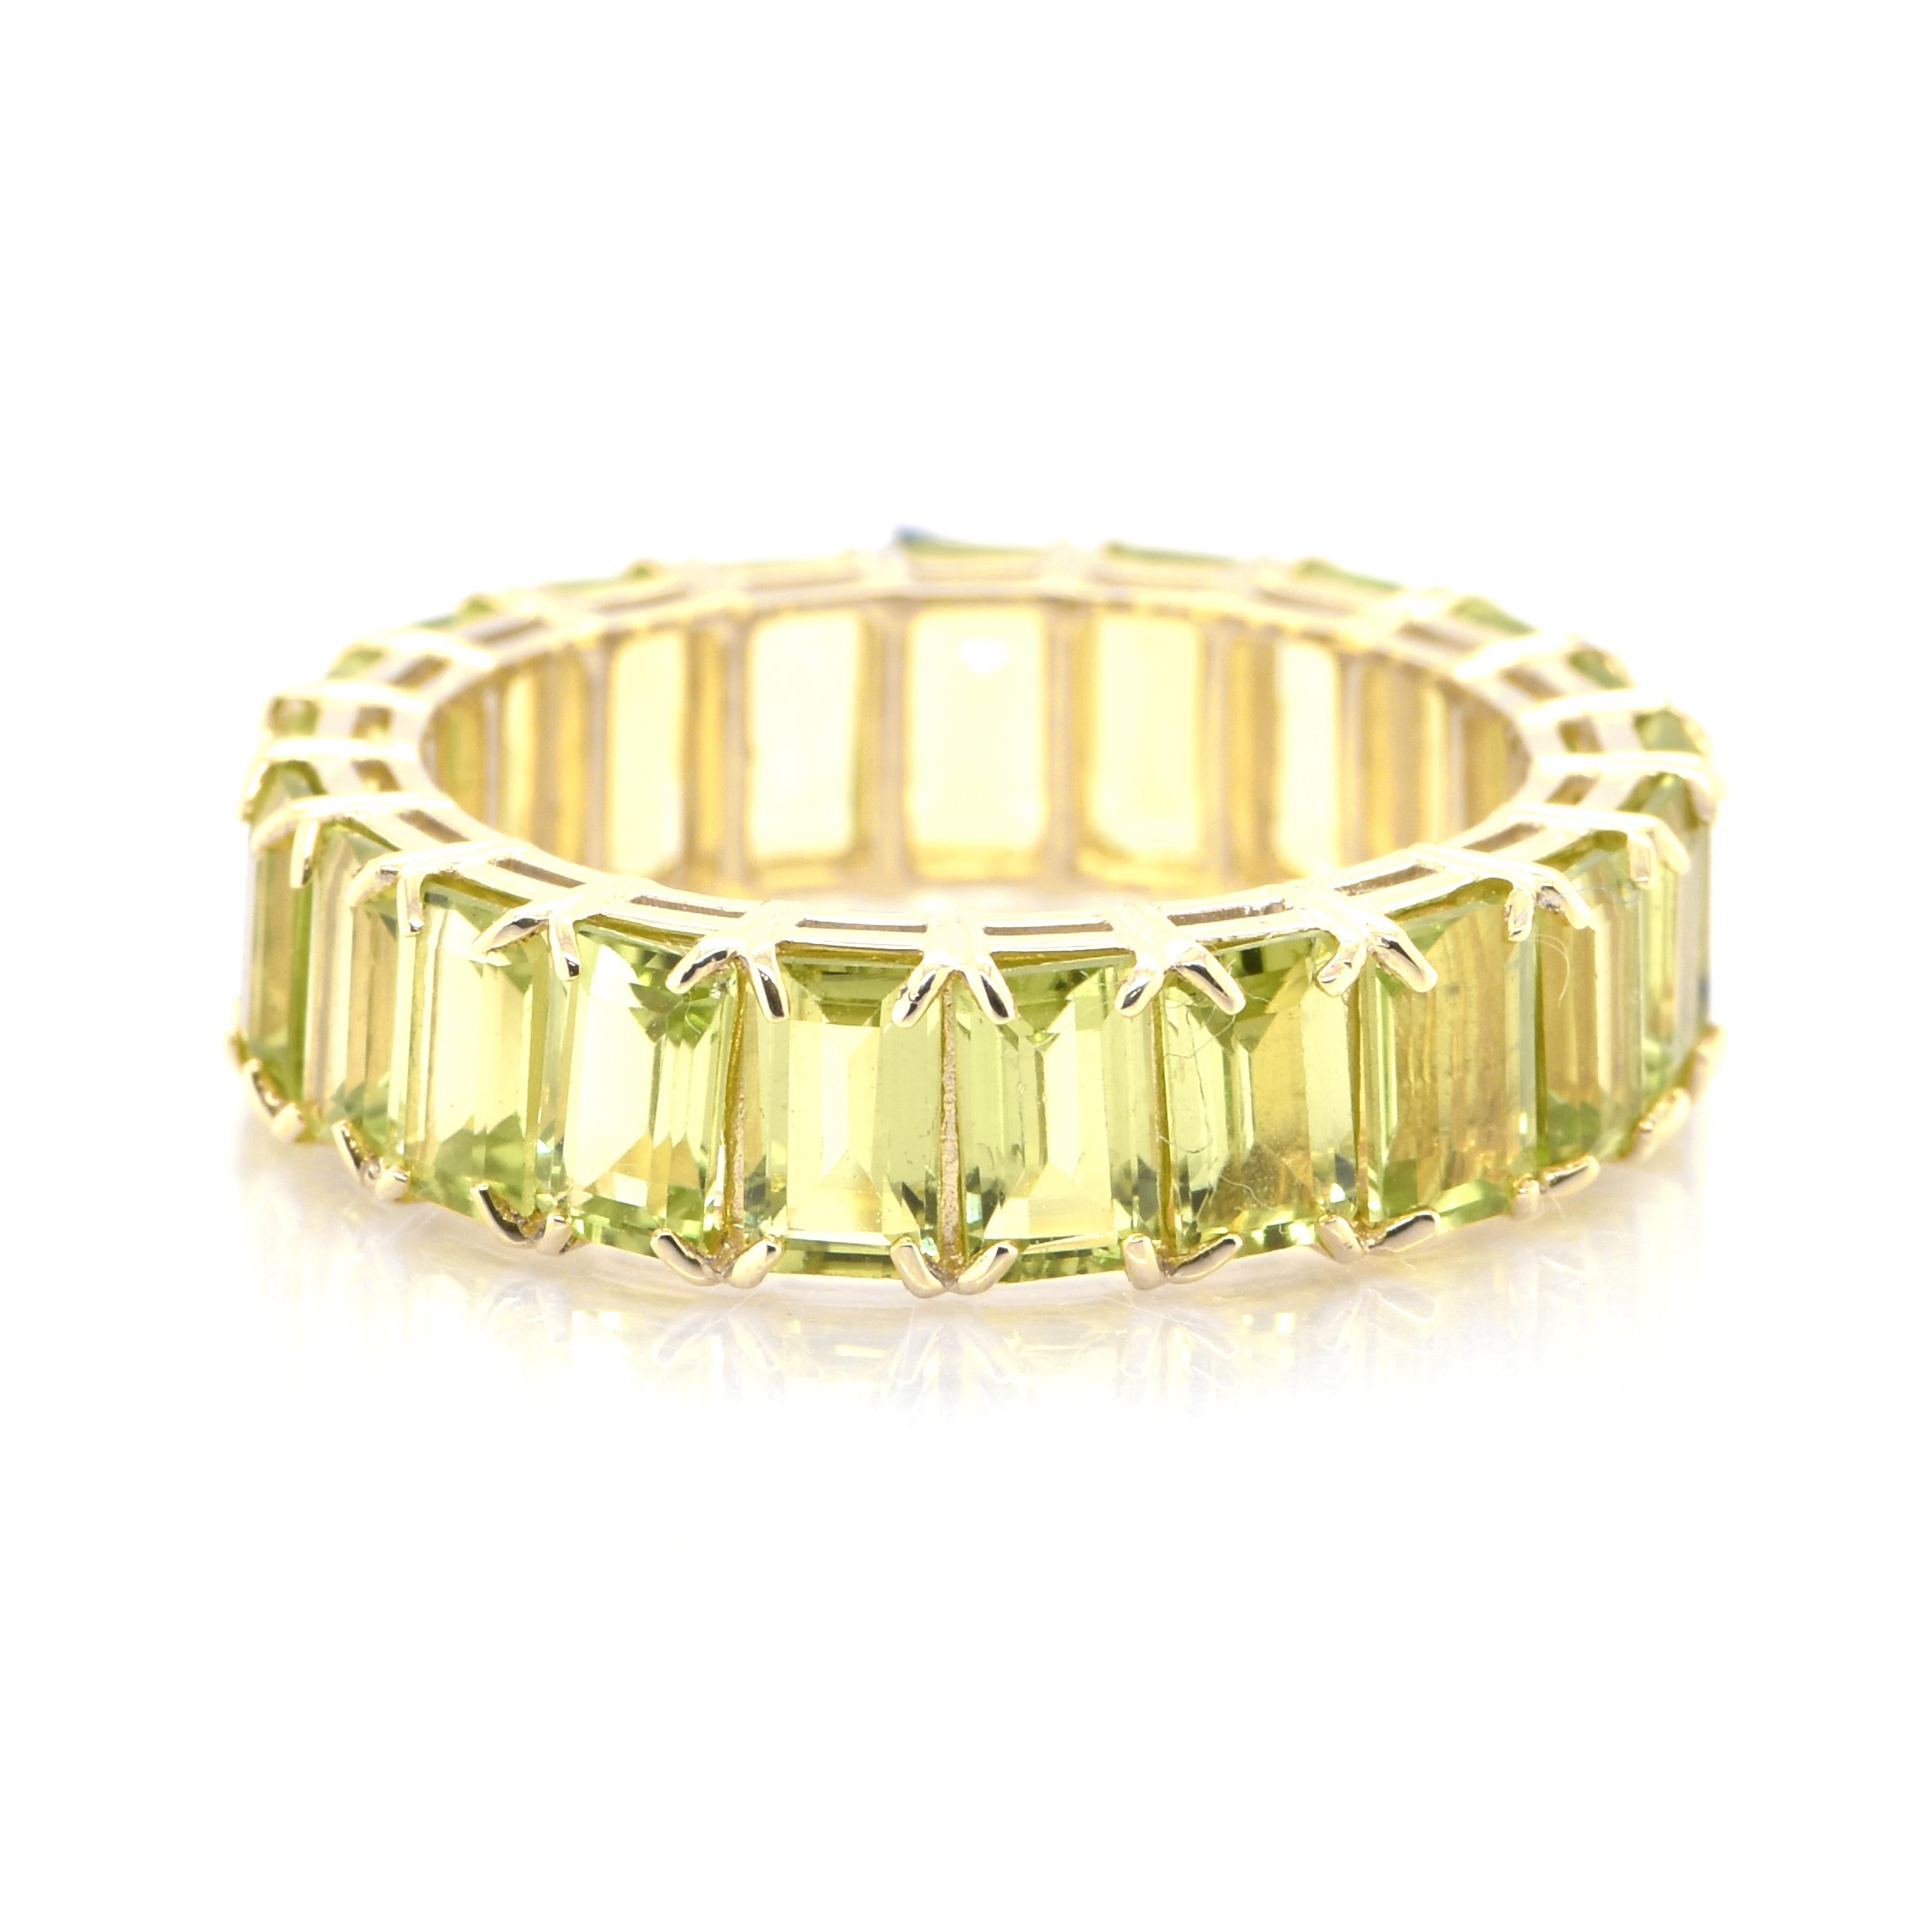 A beautiful full eternity Ring featuring 6.35 Carats Natural Peridot set in 18 Karat Yellow Gold. From the earliest times, people confused Peridot with other gems such as Emerald and Topaz. Some historians believe that Cleopatra’s famous emerald